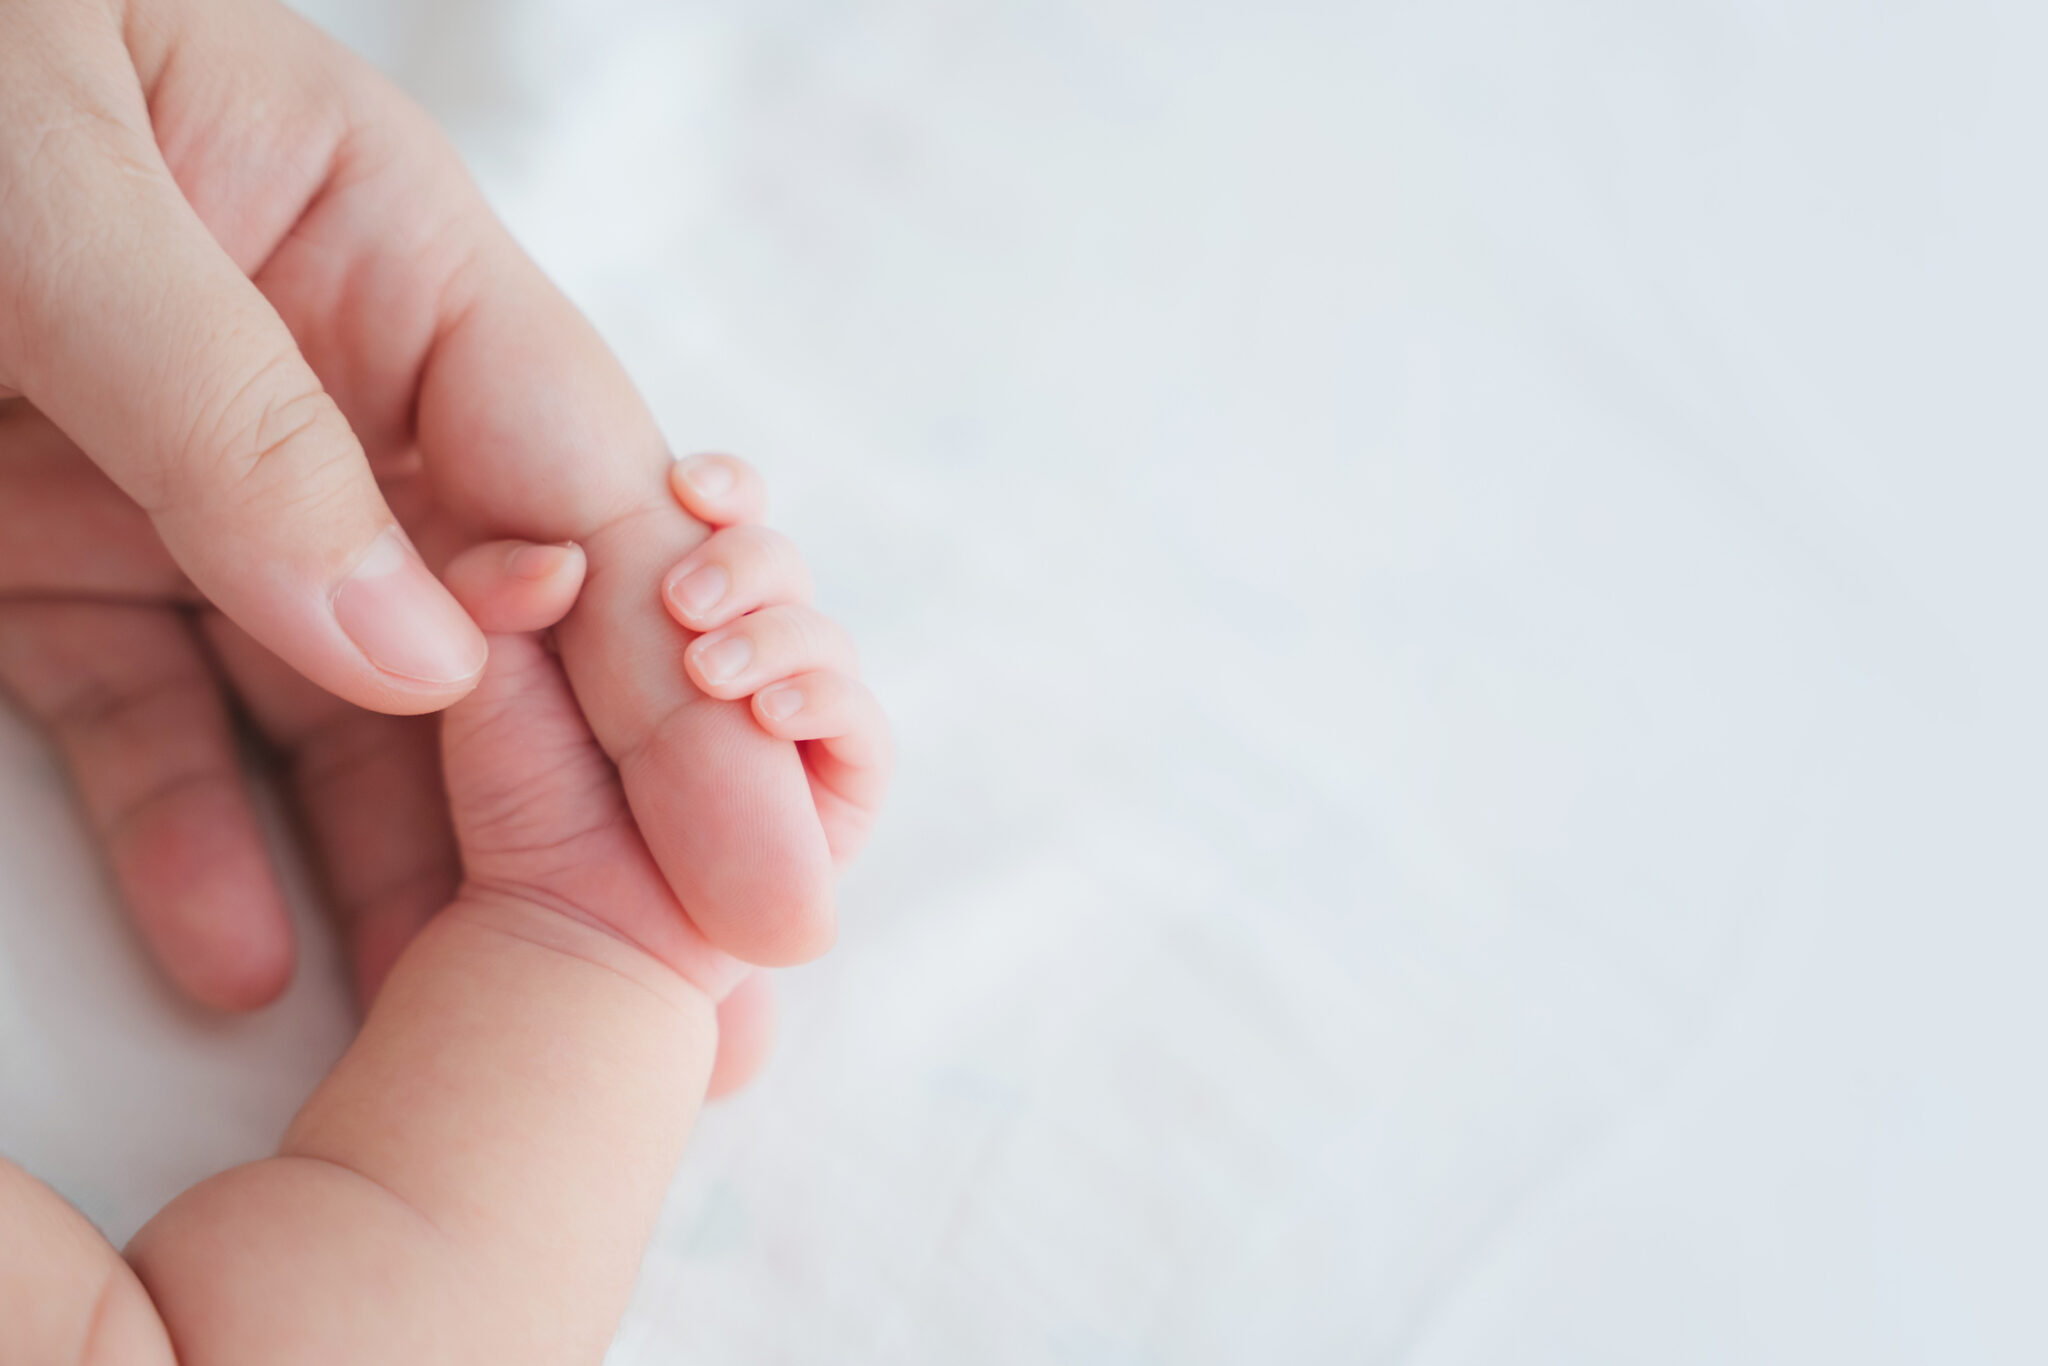 Idaho’s infant, mother death rate is rising, new report finds